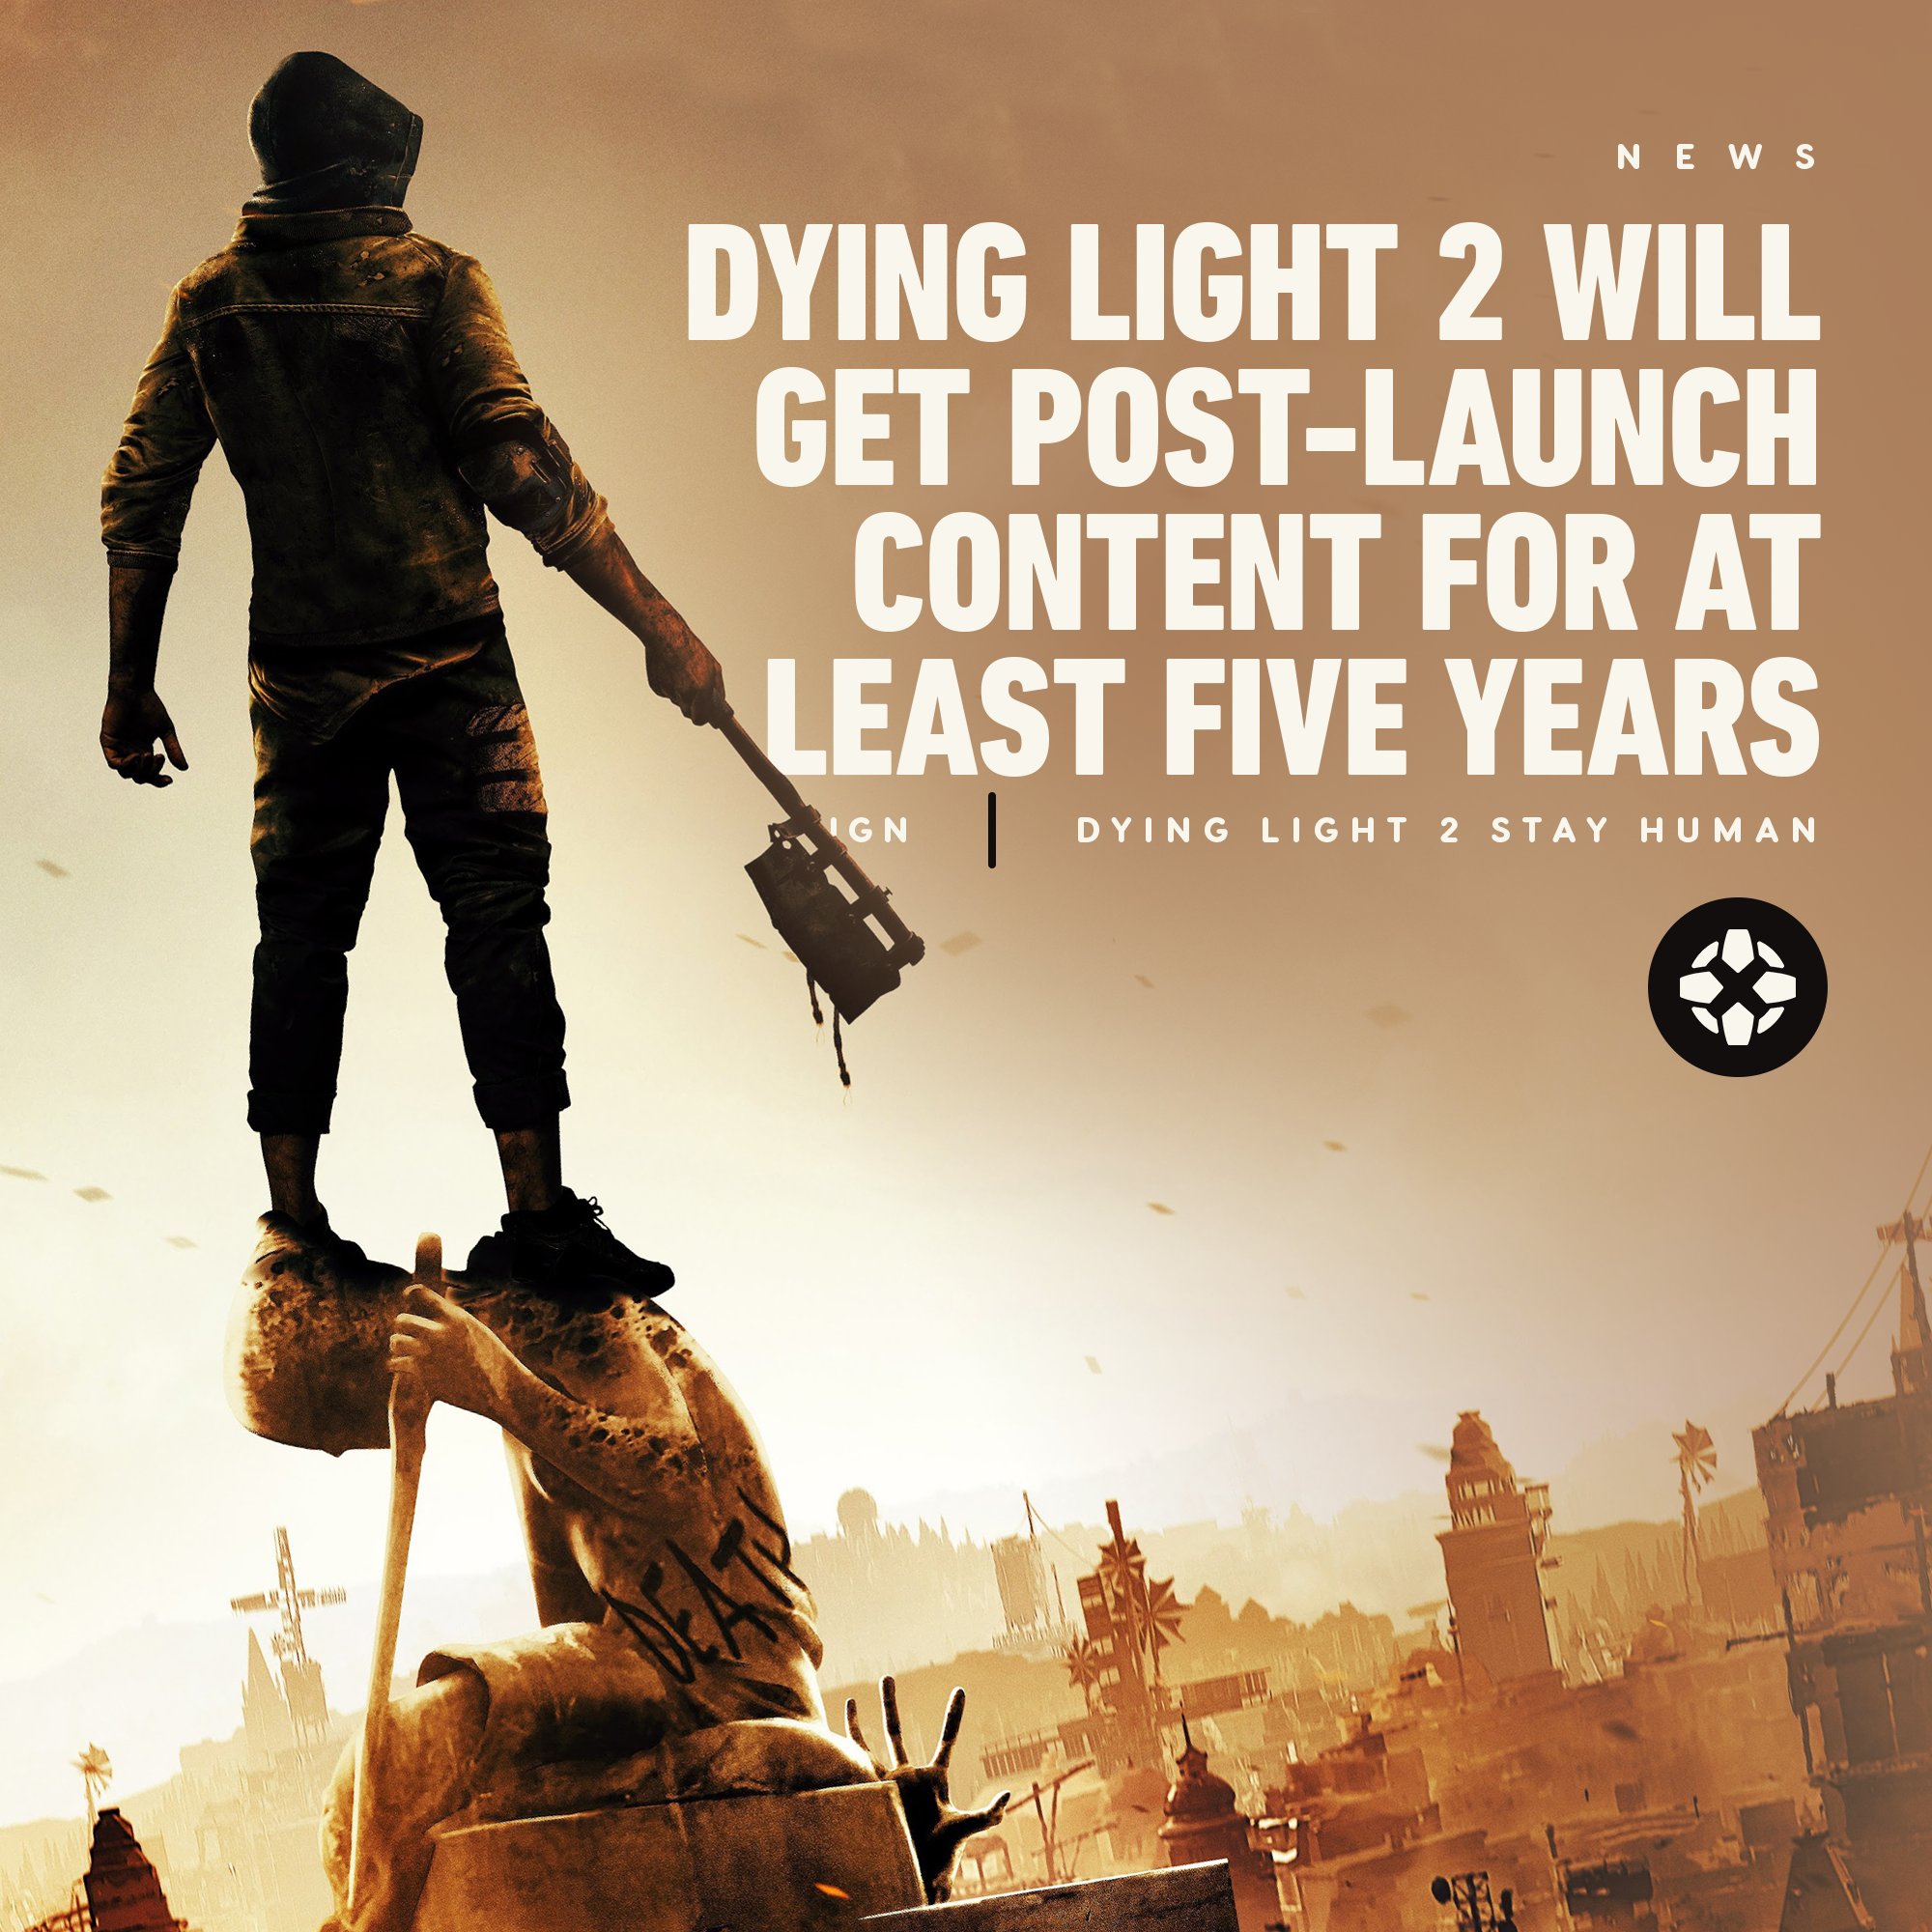 Dying Light 2 will have 5 years of post launch content but cross